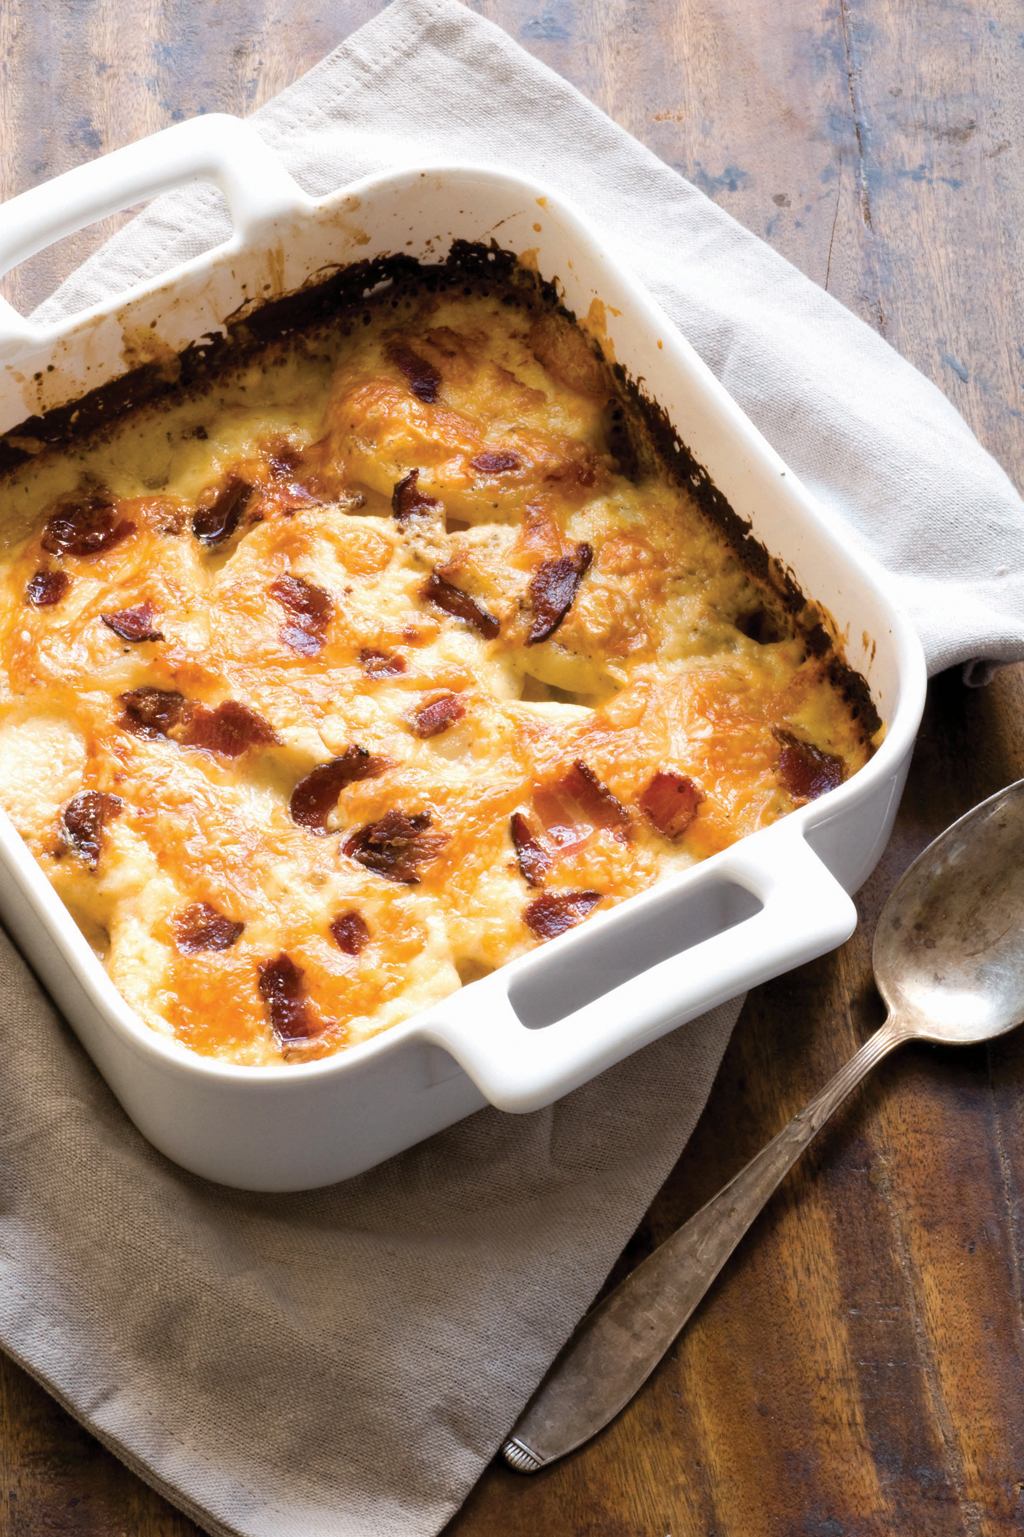 Chipotle cheddar scalloped potatoes